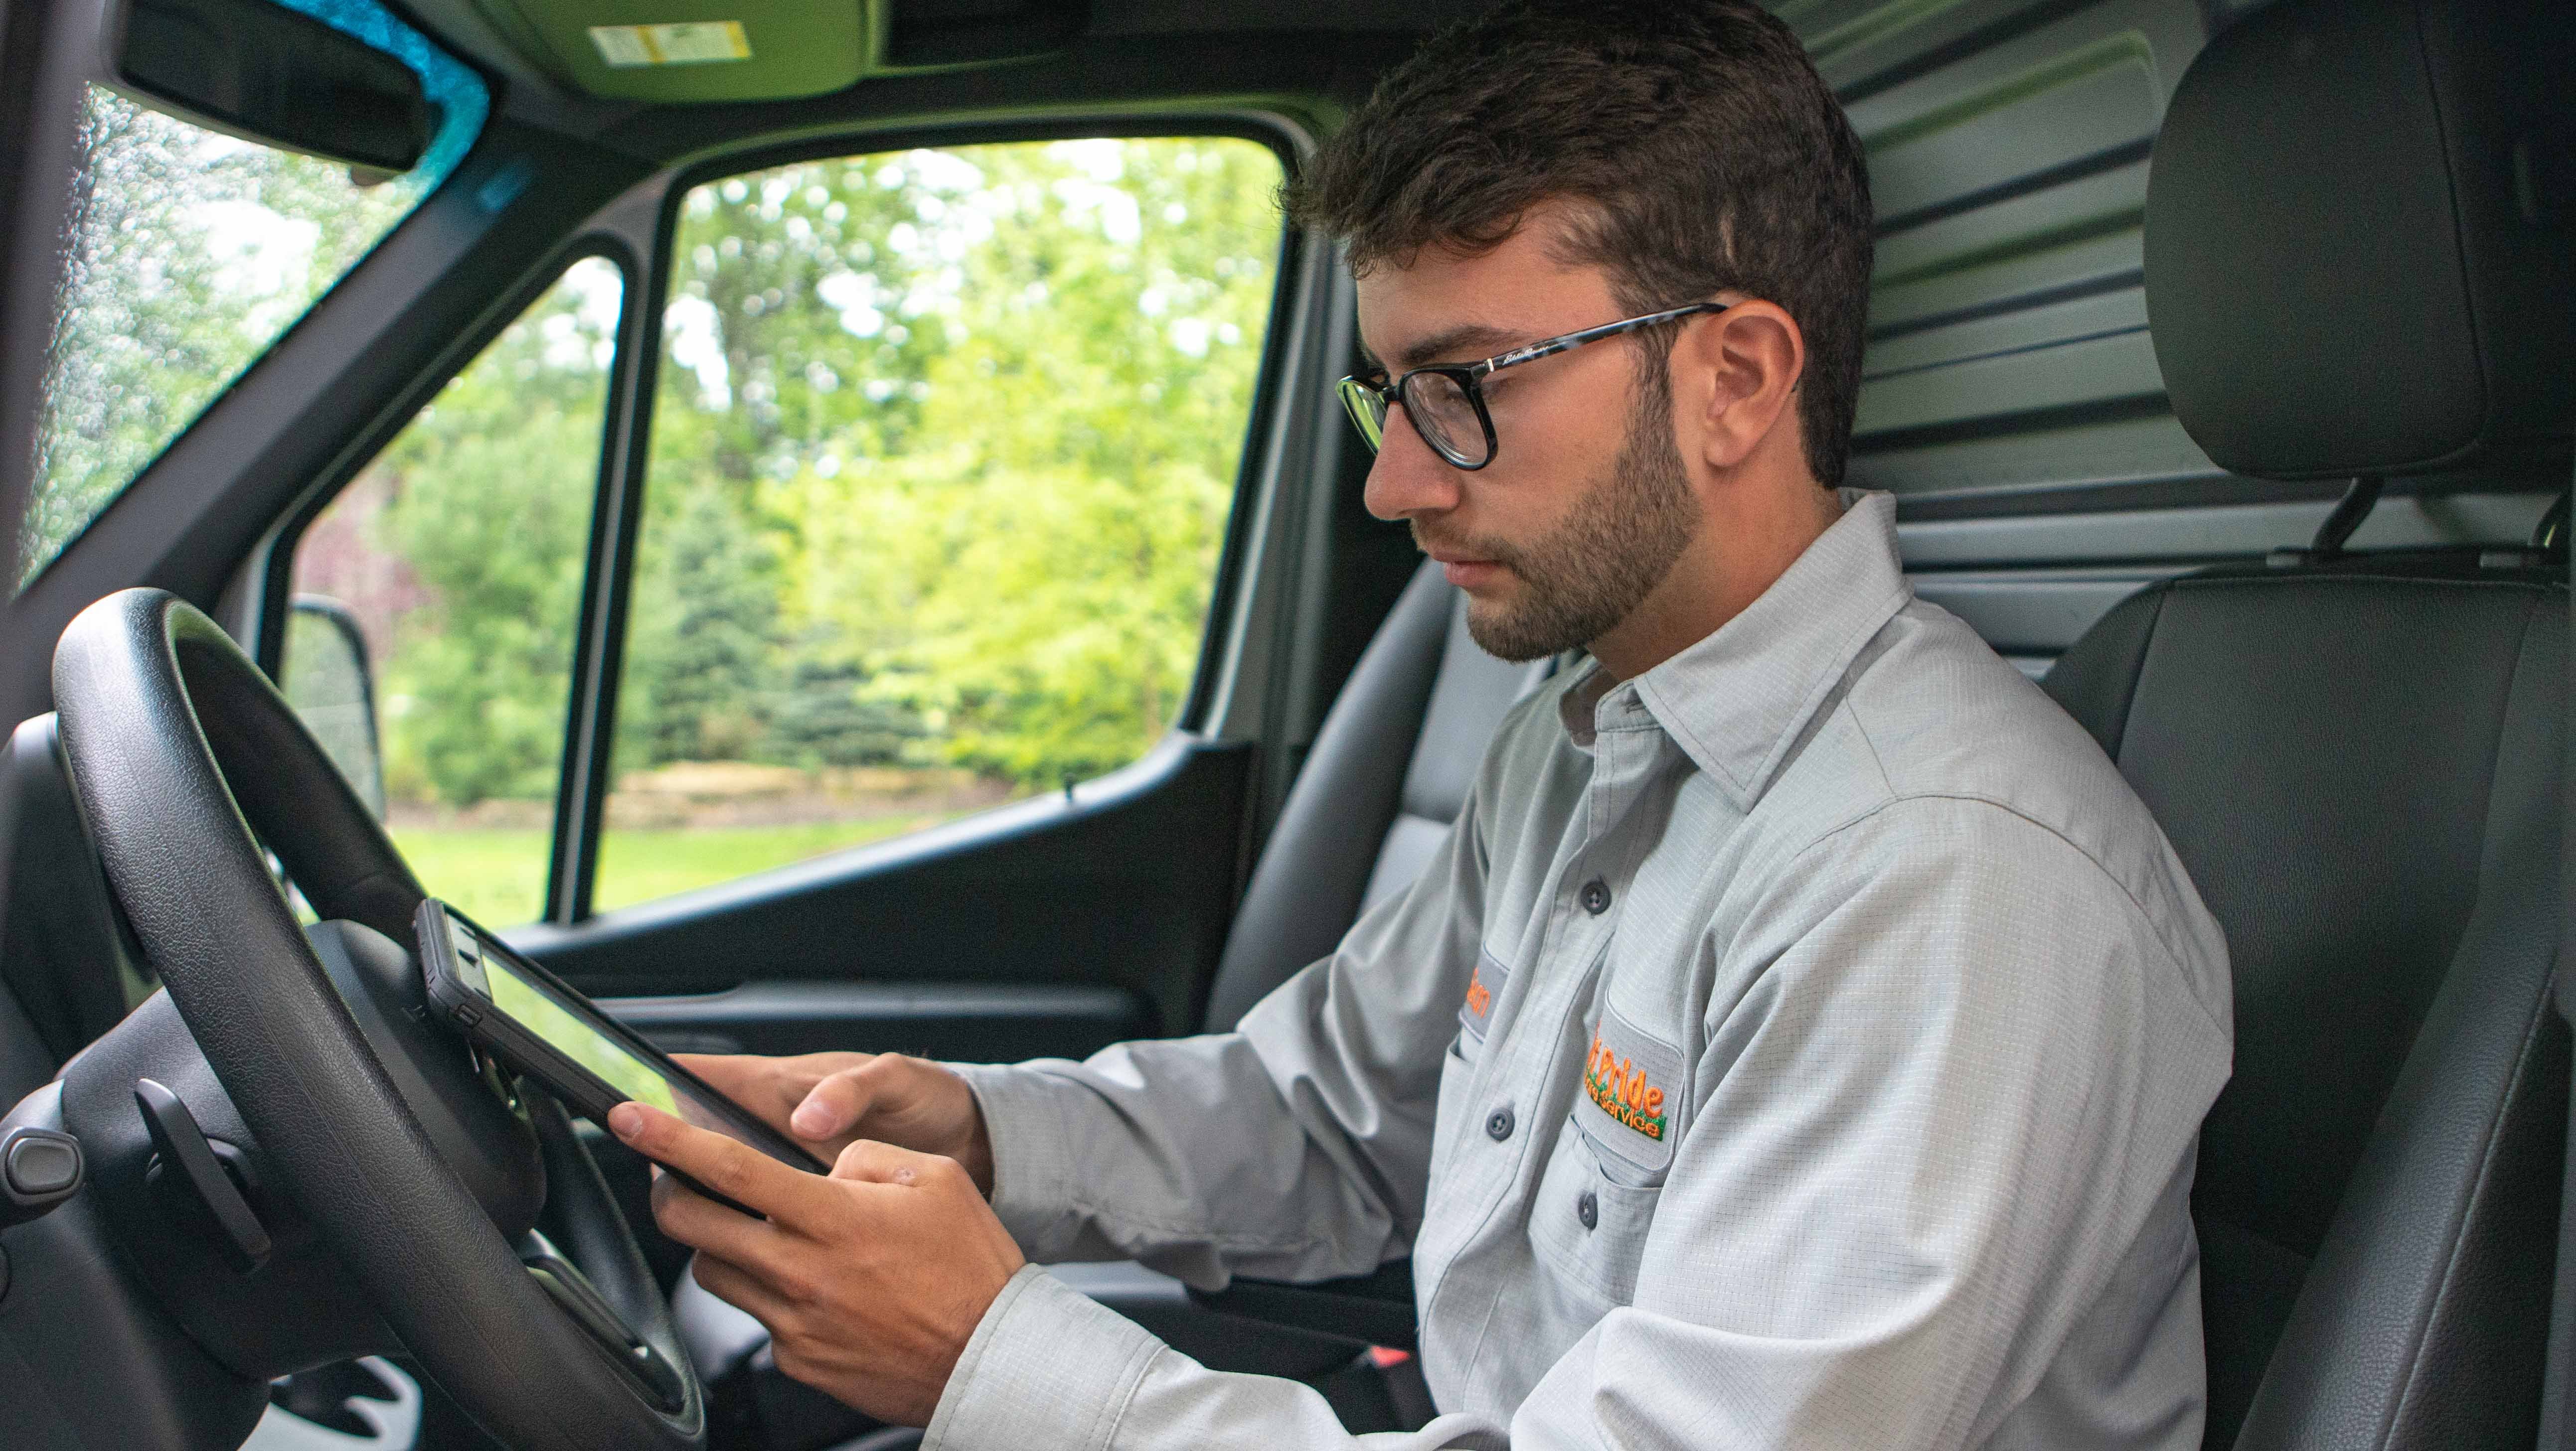 technician in truck texting customer on tablet